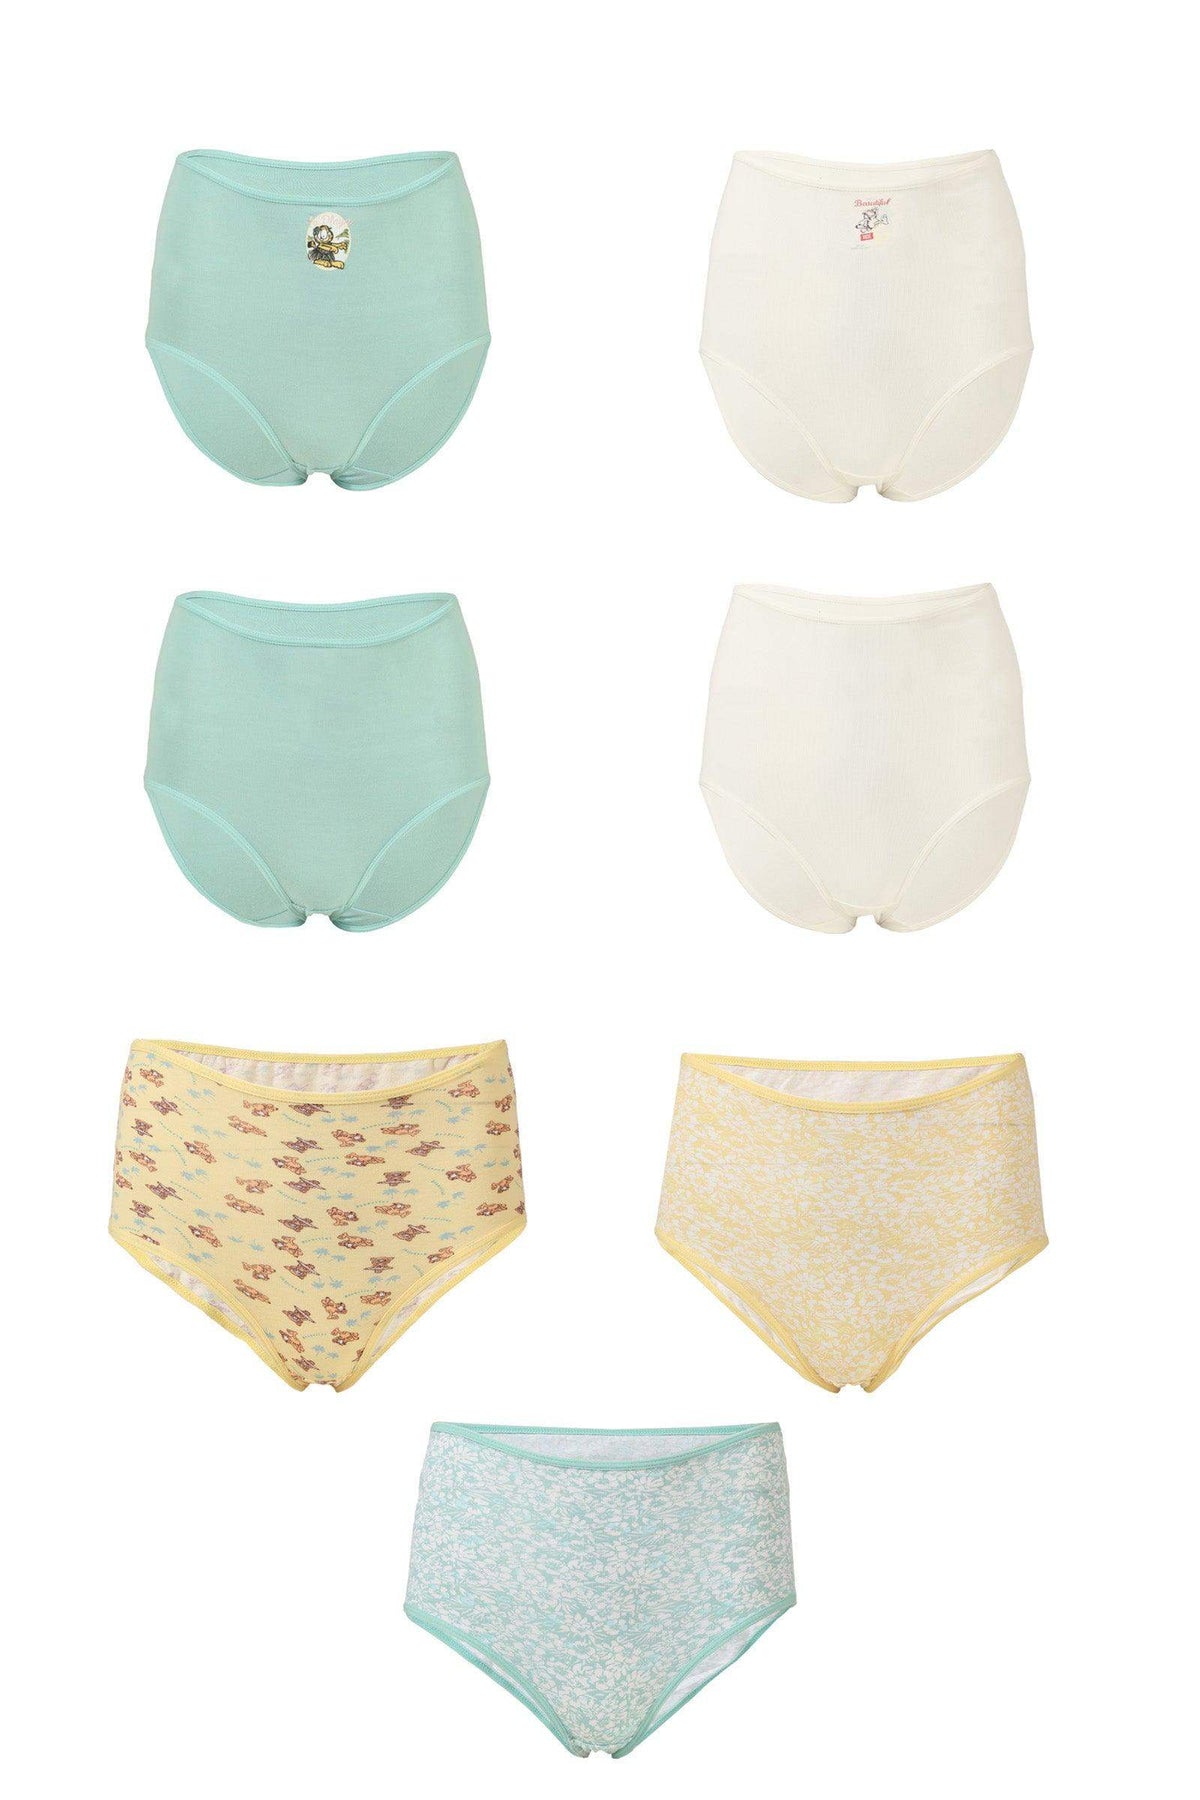 Pack of 7 Colored Full Brief Panties - Carina - كارينا